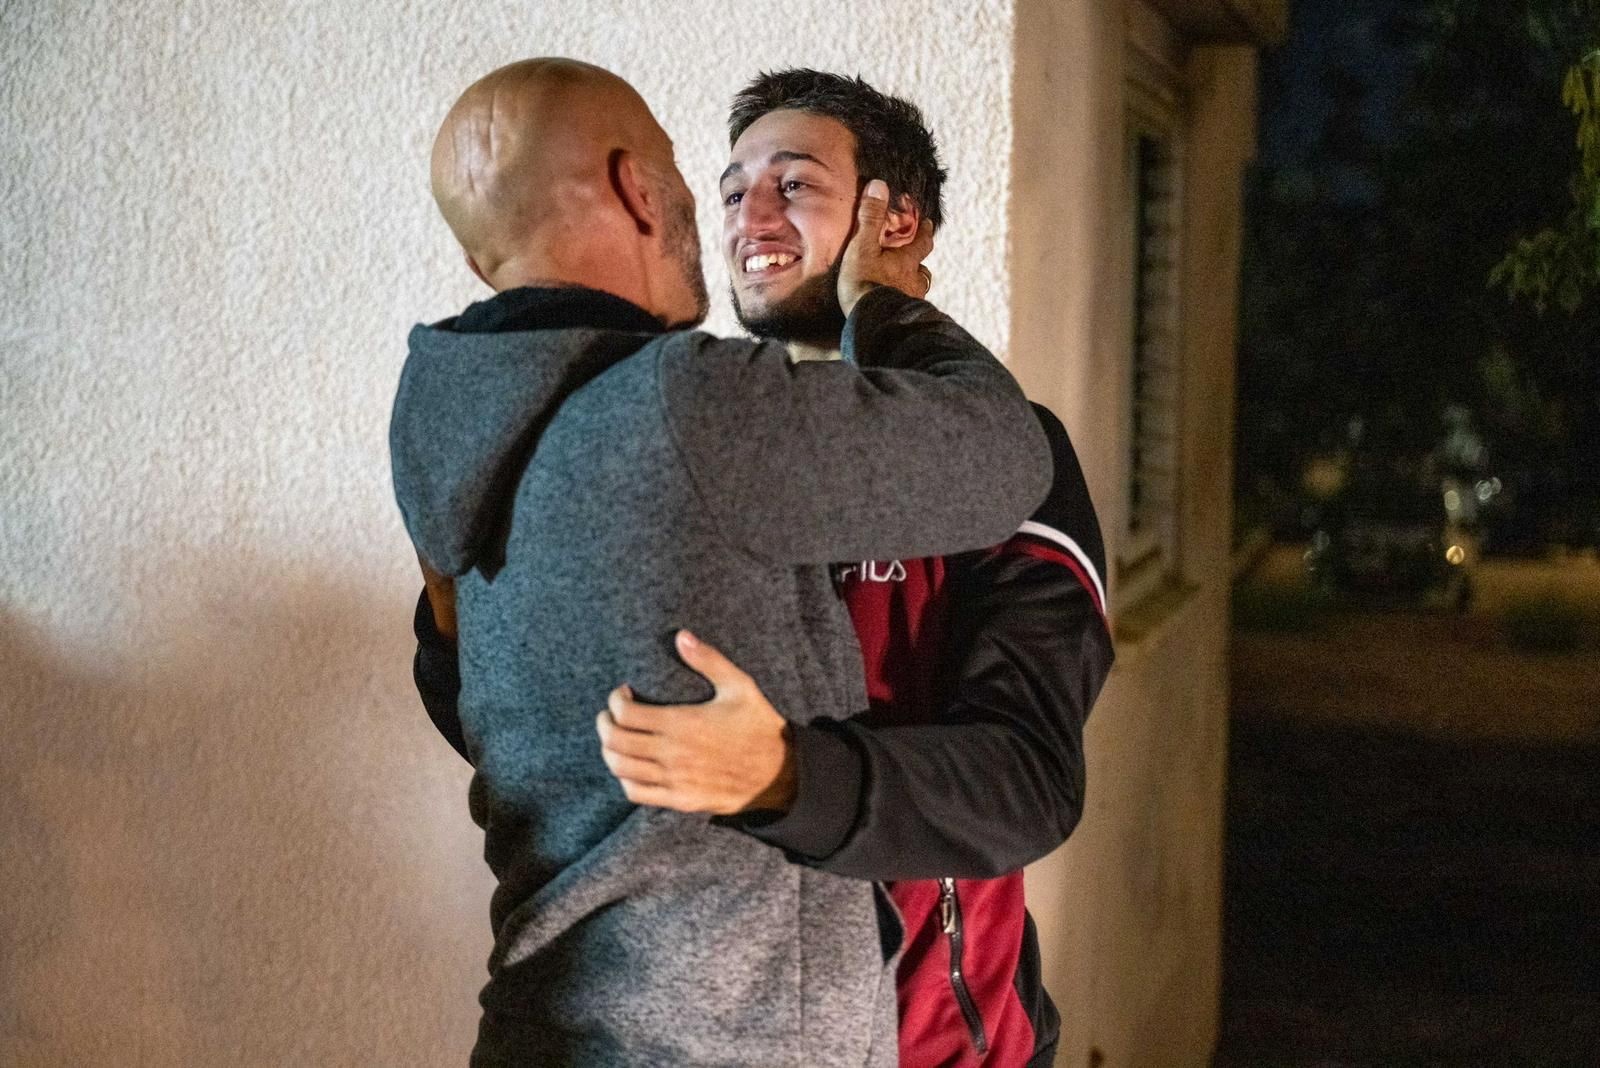 A young man looks at his father smiling as they embrace